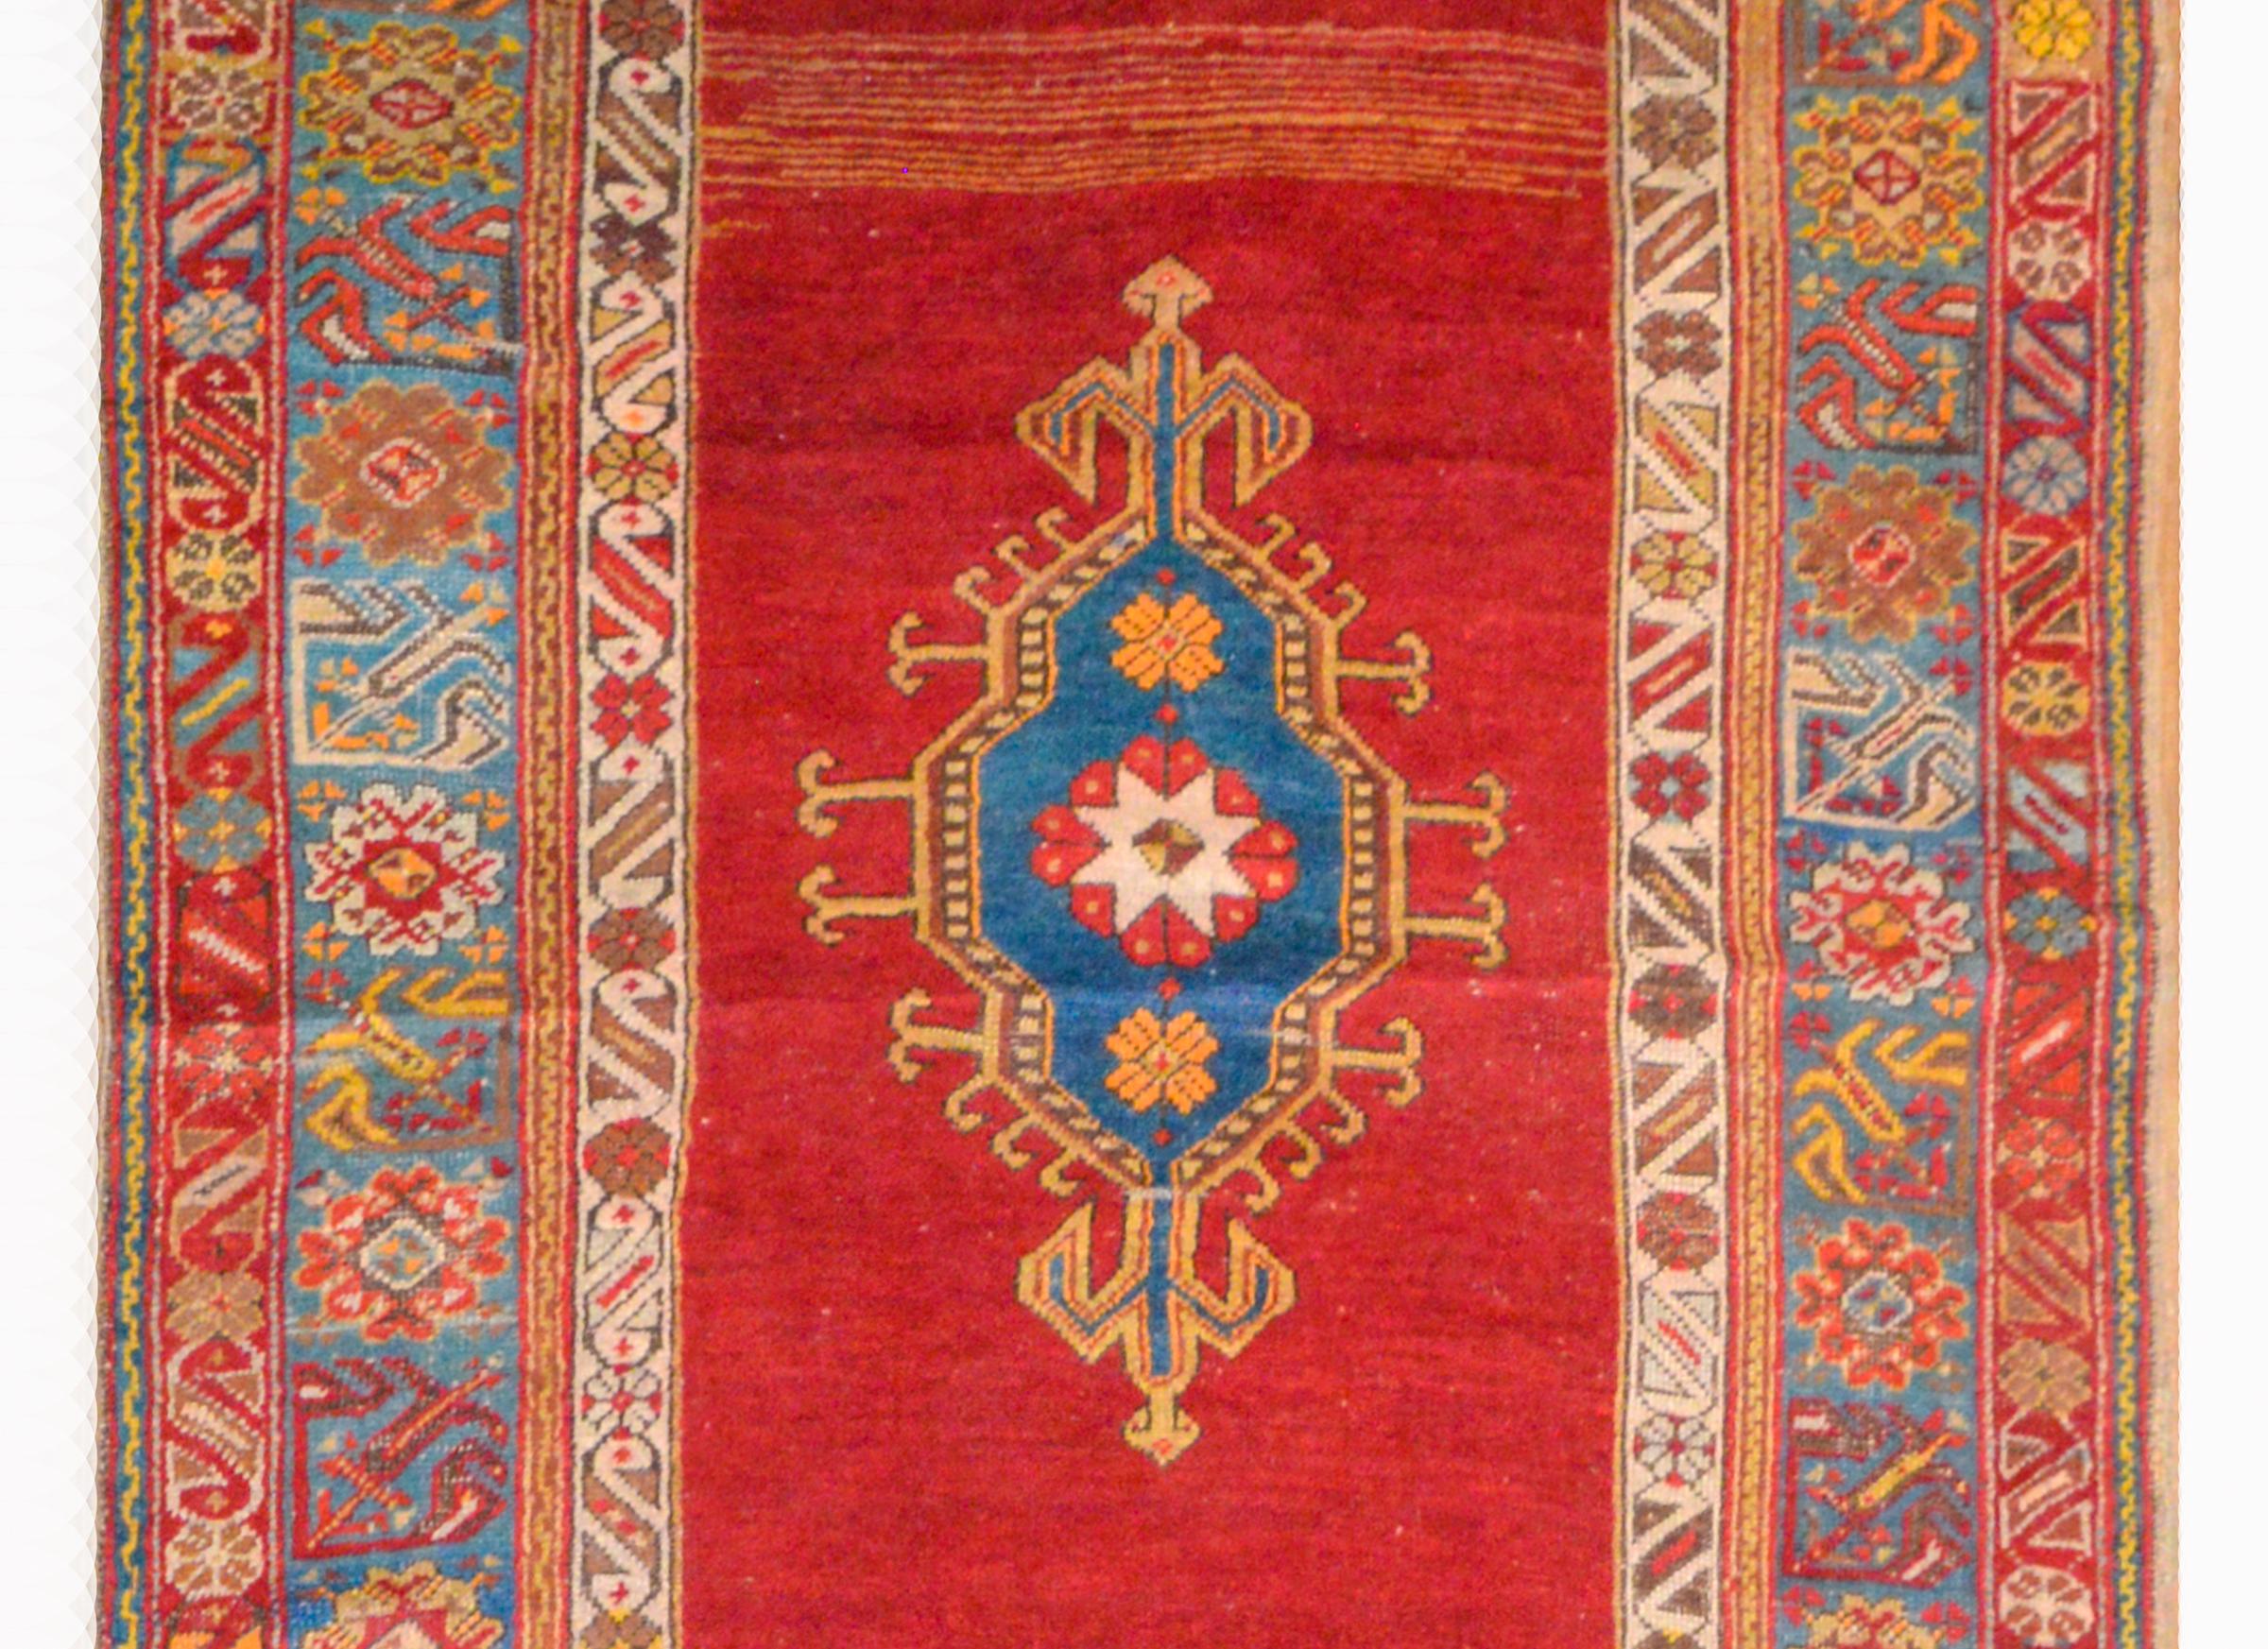 An amazing early 20th century Turkish Konya runner with three large indigo diamond medallions abasing a bold crimson background, and surrounded by a wide border containing multiple floral and stylized floral patterned stripes, all woven in crimson,